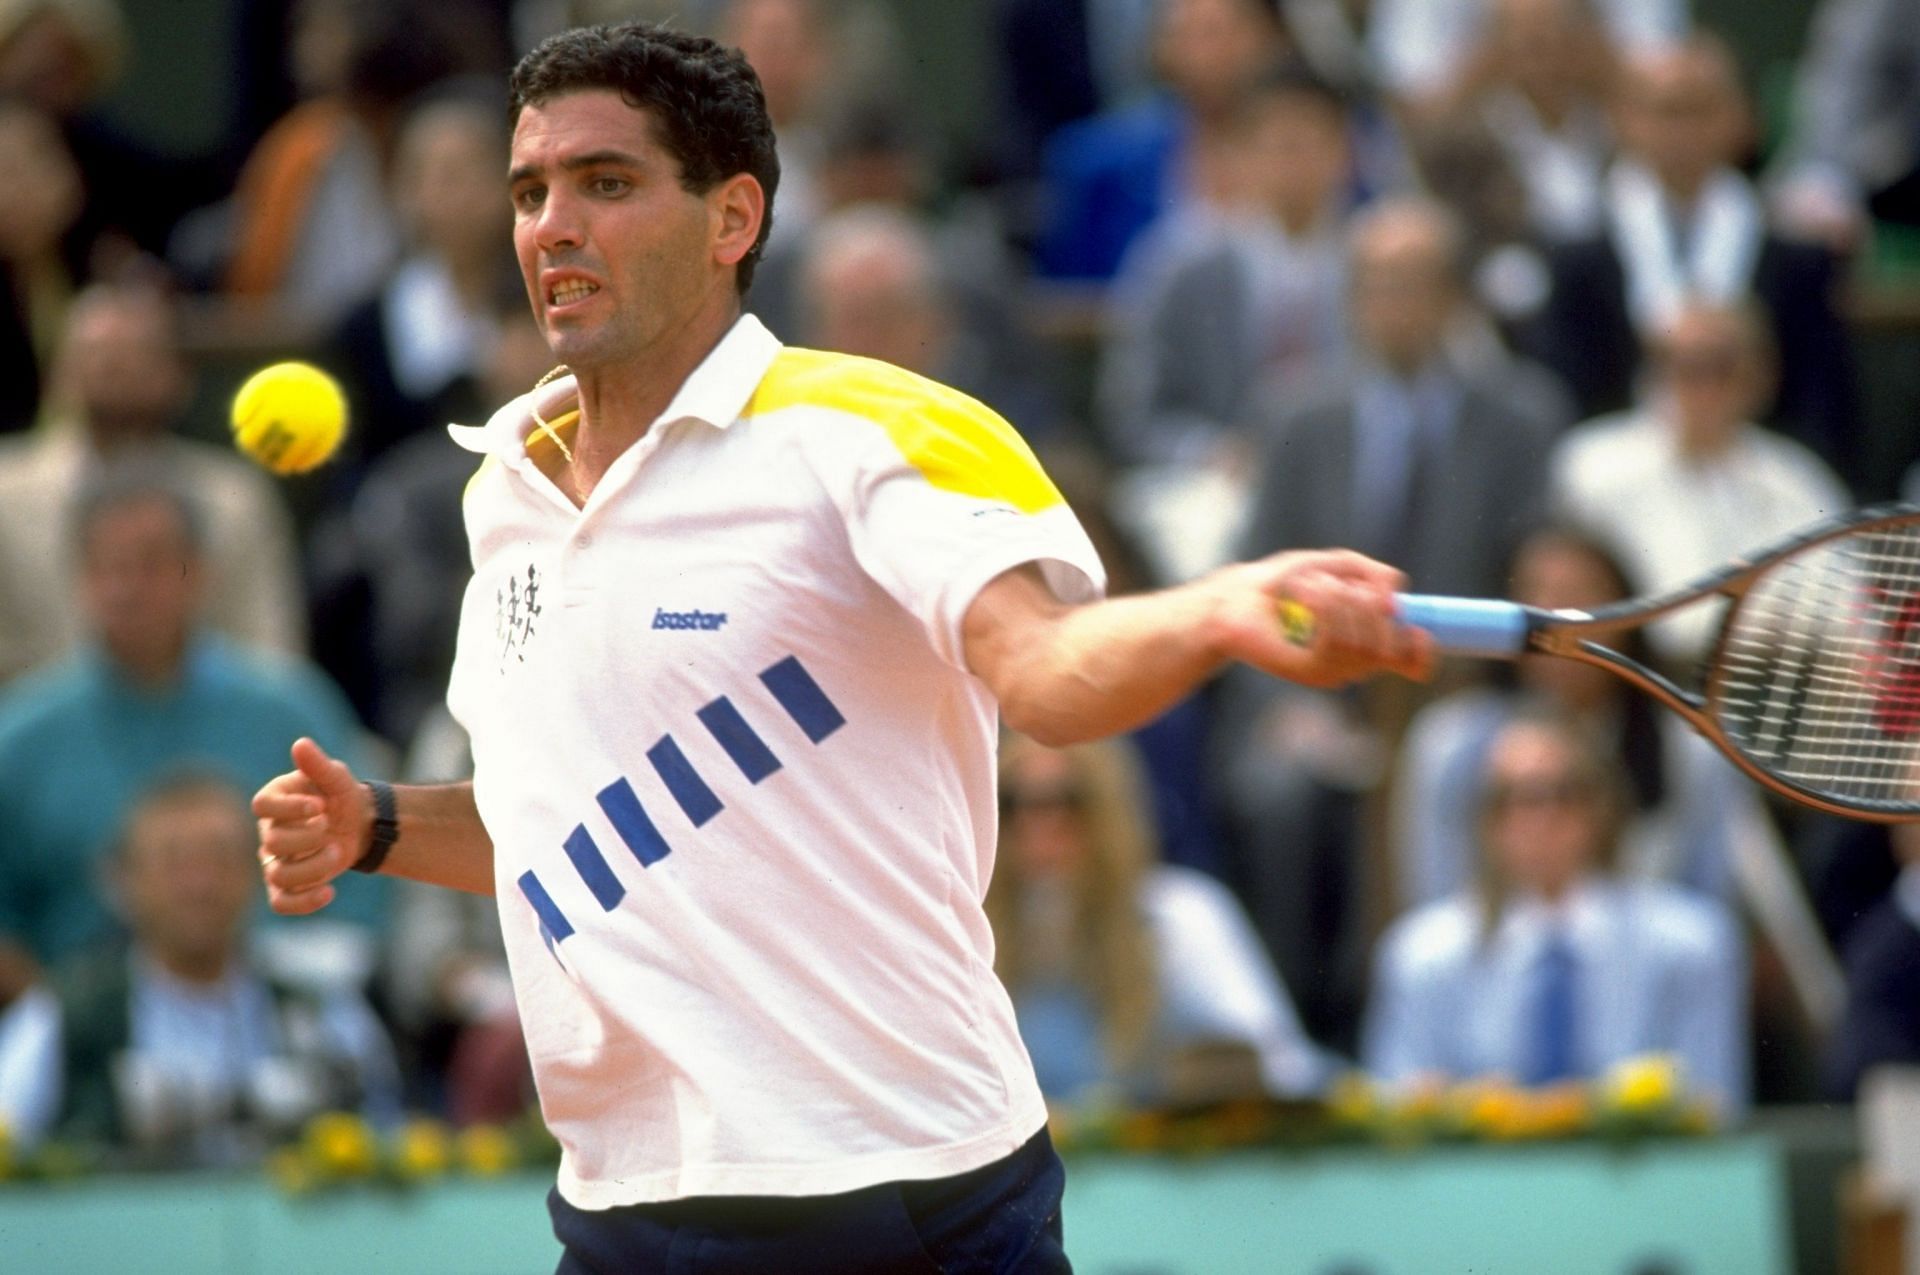 Andres Gomez won the tournament in 1990